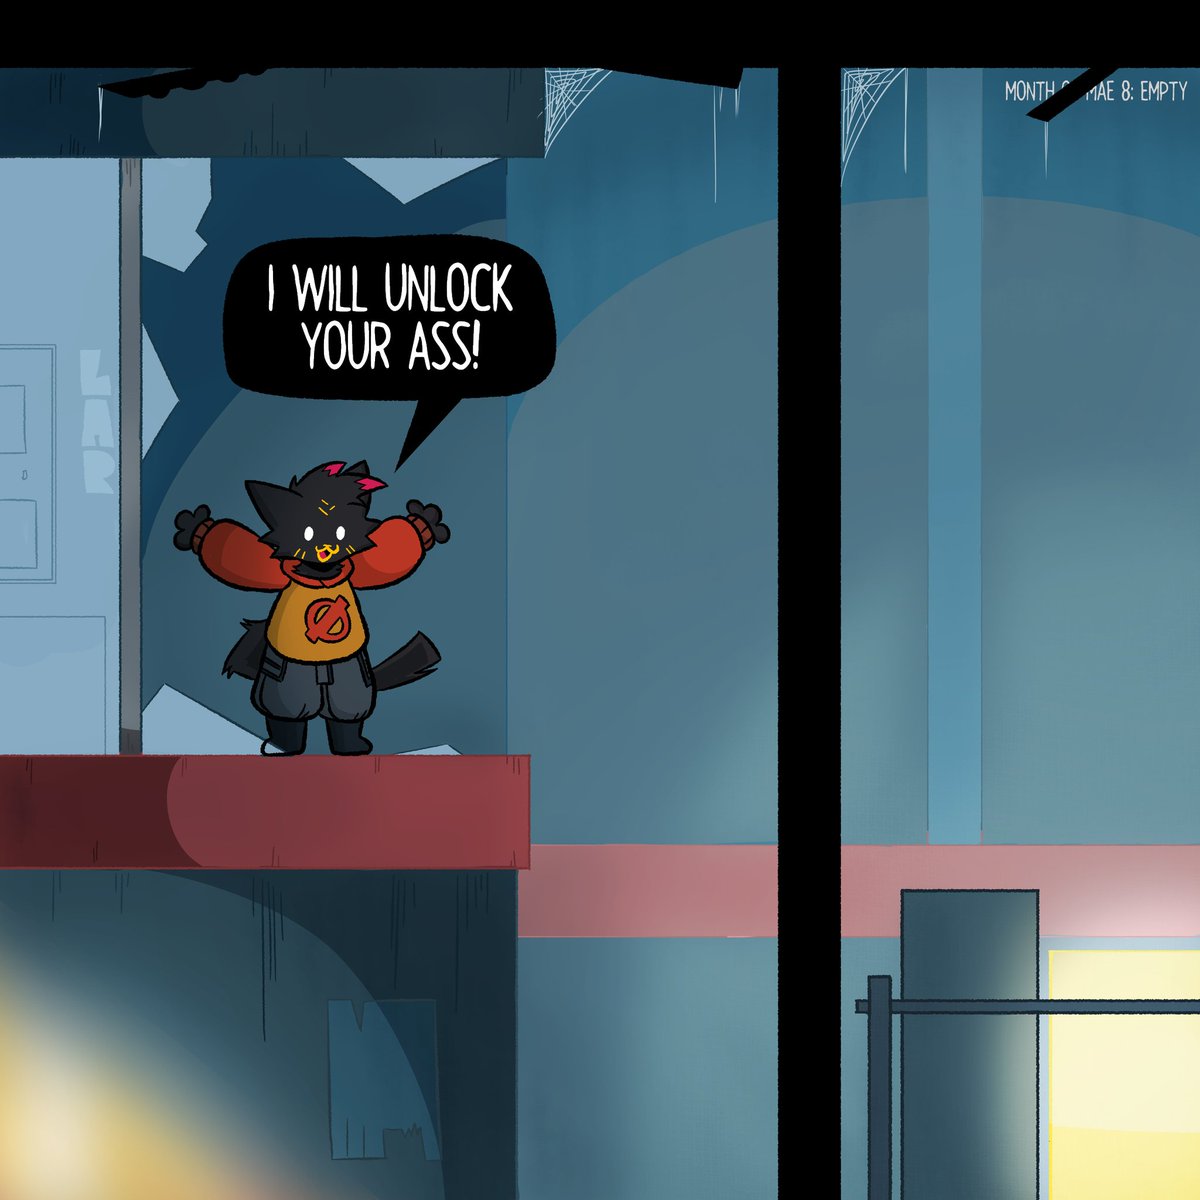 #Monthofmae2024 Day 8: Empty

I will UNLOCK YOUR ASS!!! this one's a bit late cause I had a big school portfolio show, and it took forever to lay this out properly. But hopefully you enjoy nonetheless! I'll probably see you all later today!

#nitw #nightinthewoods #monthofmae